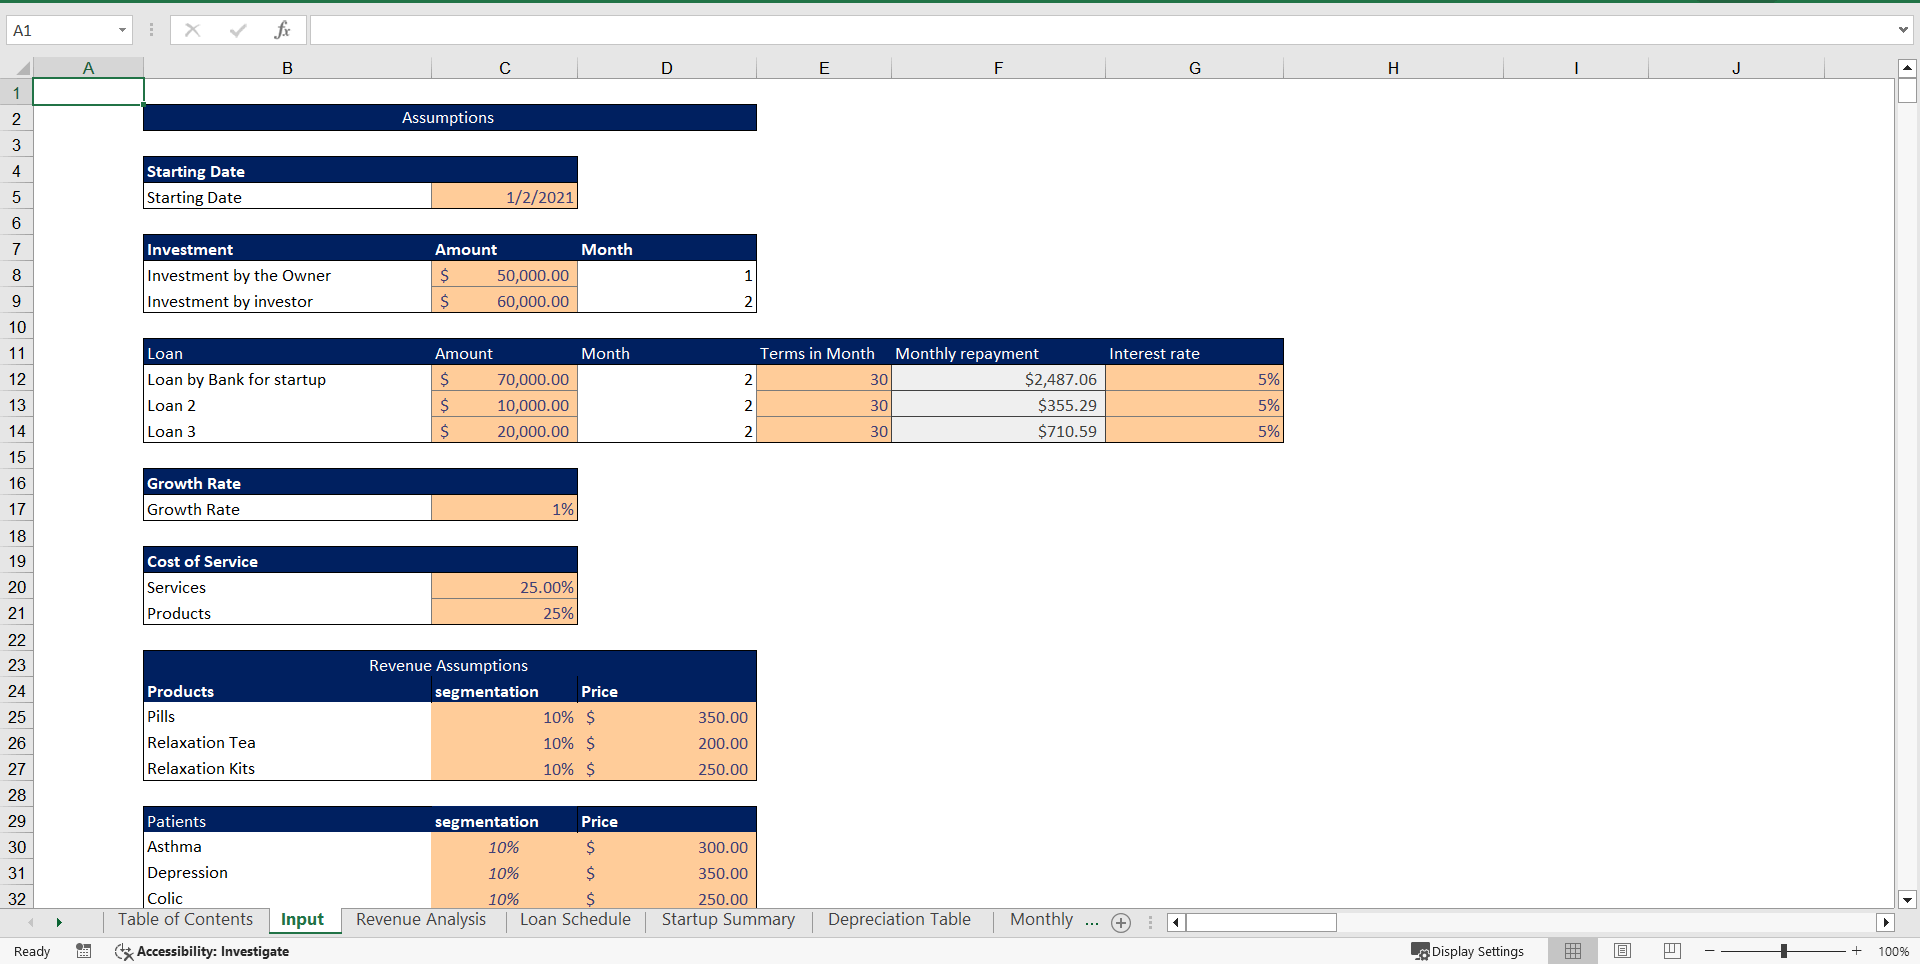 Osteopathy Center Excel Financial Model Template (Excel template (XLSX)) Preview Image